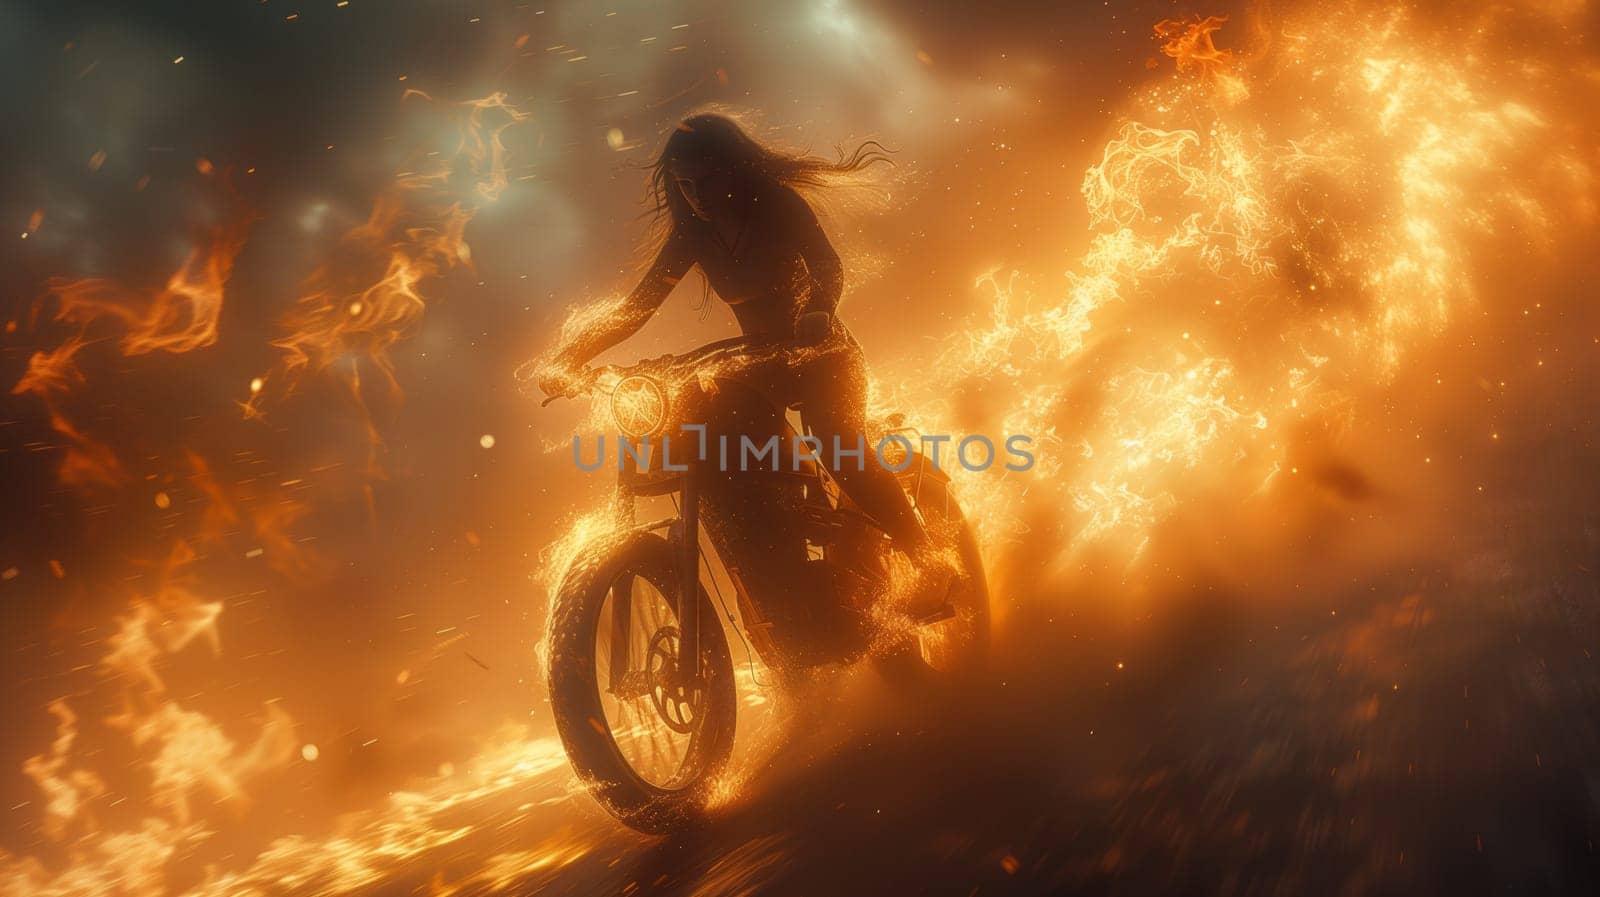 A woman is navigating her motorcycle through flames, with the wheel and tire spinning as the vehicle speeds through the fiery landscape towards the cloudy sky